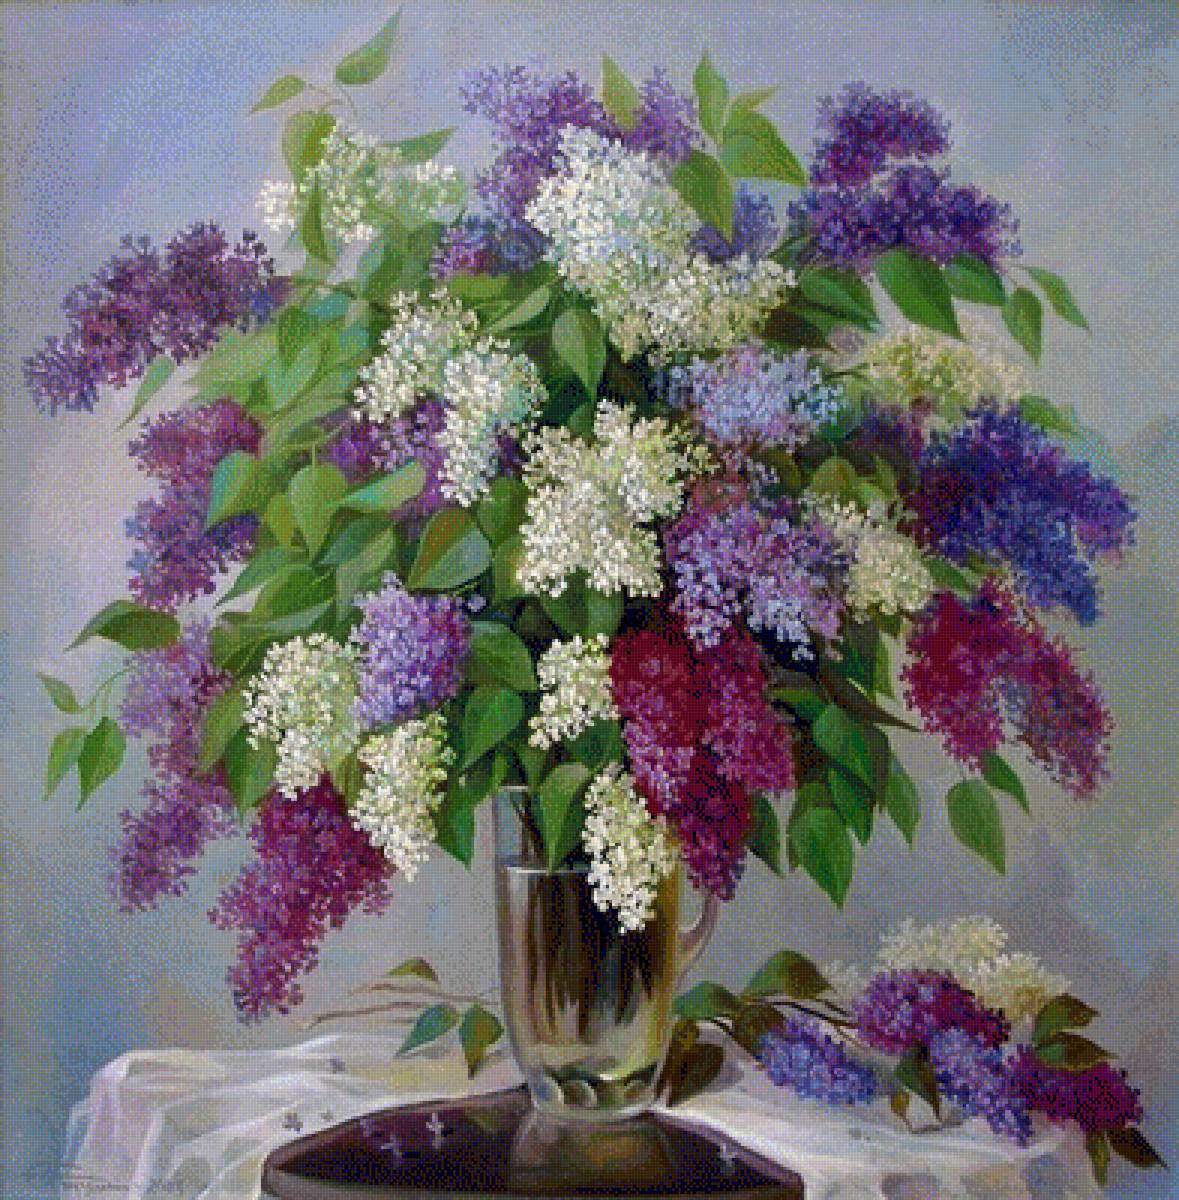 Lilacs In Vase - lilacs in vase by mary catherine lema - предпросмотр